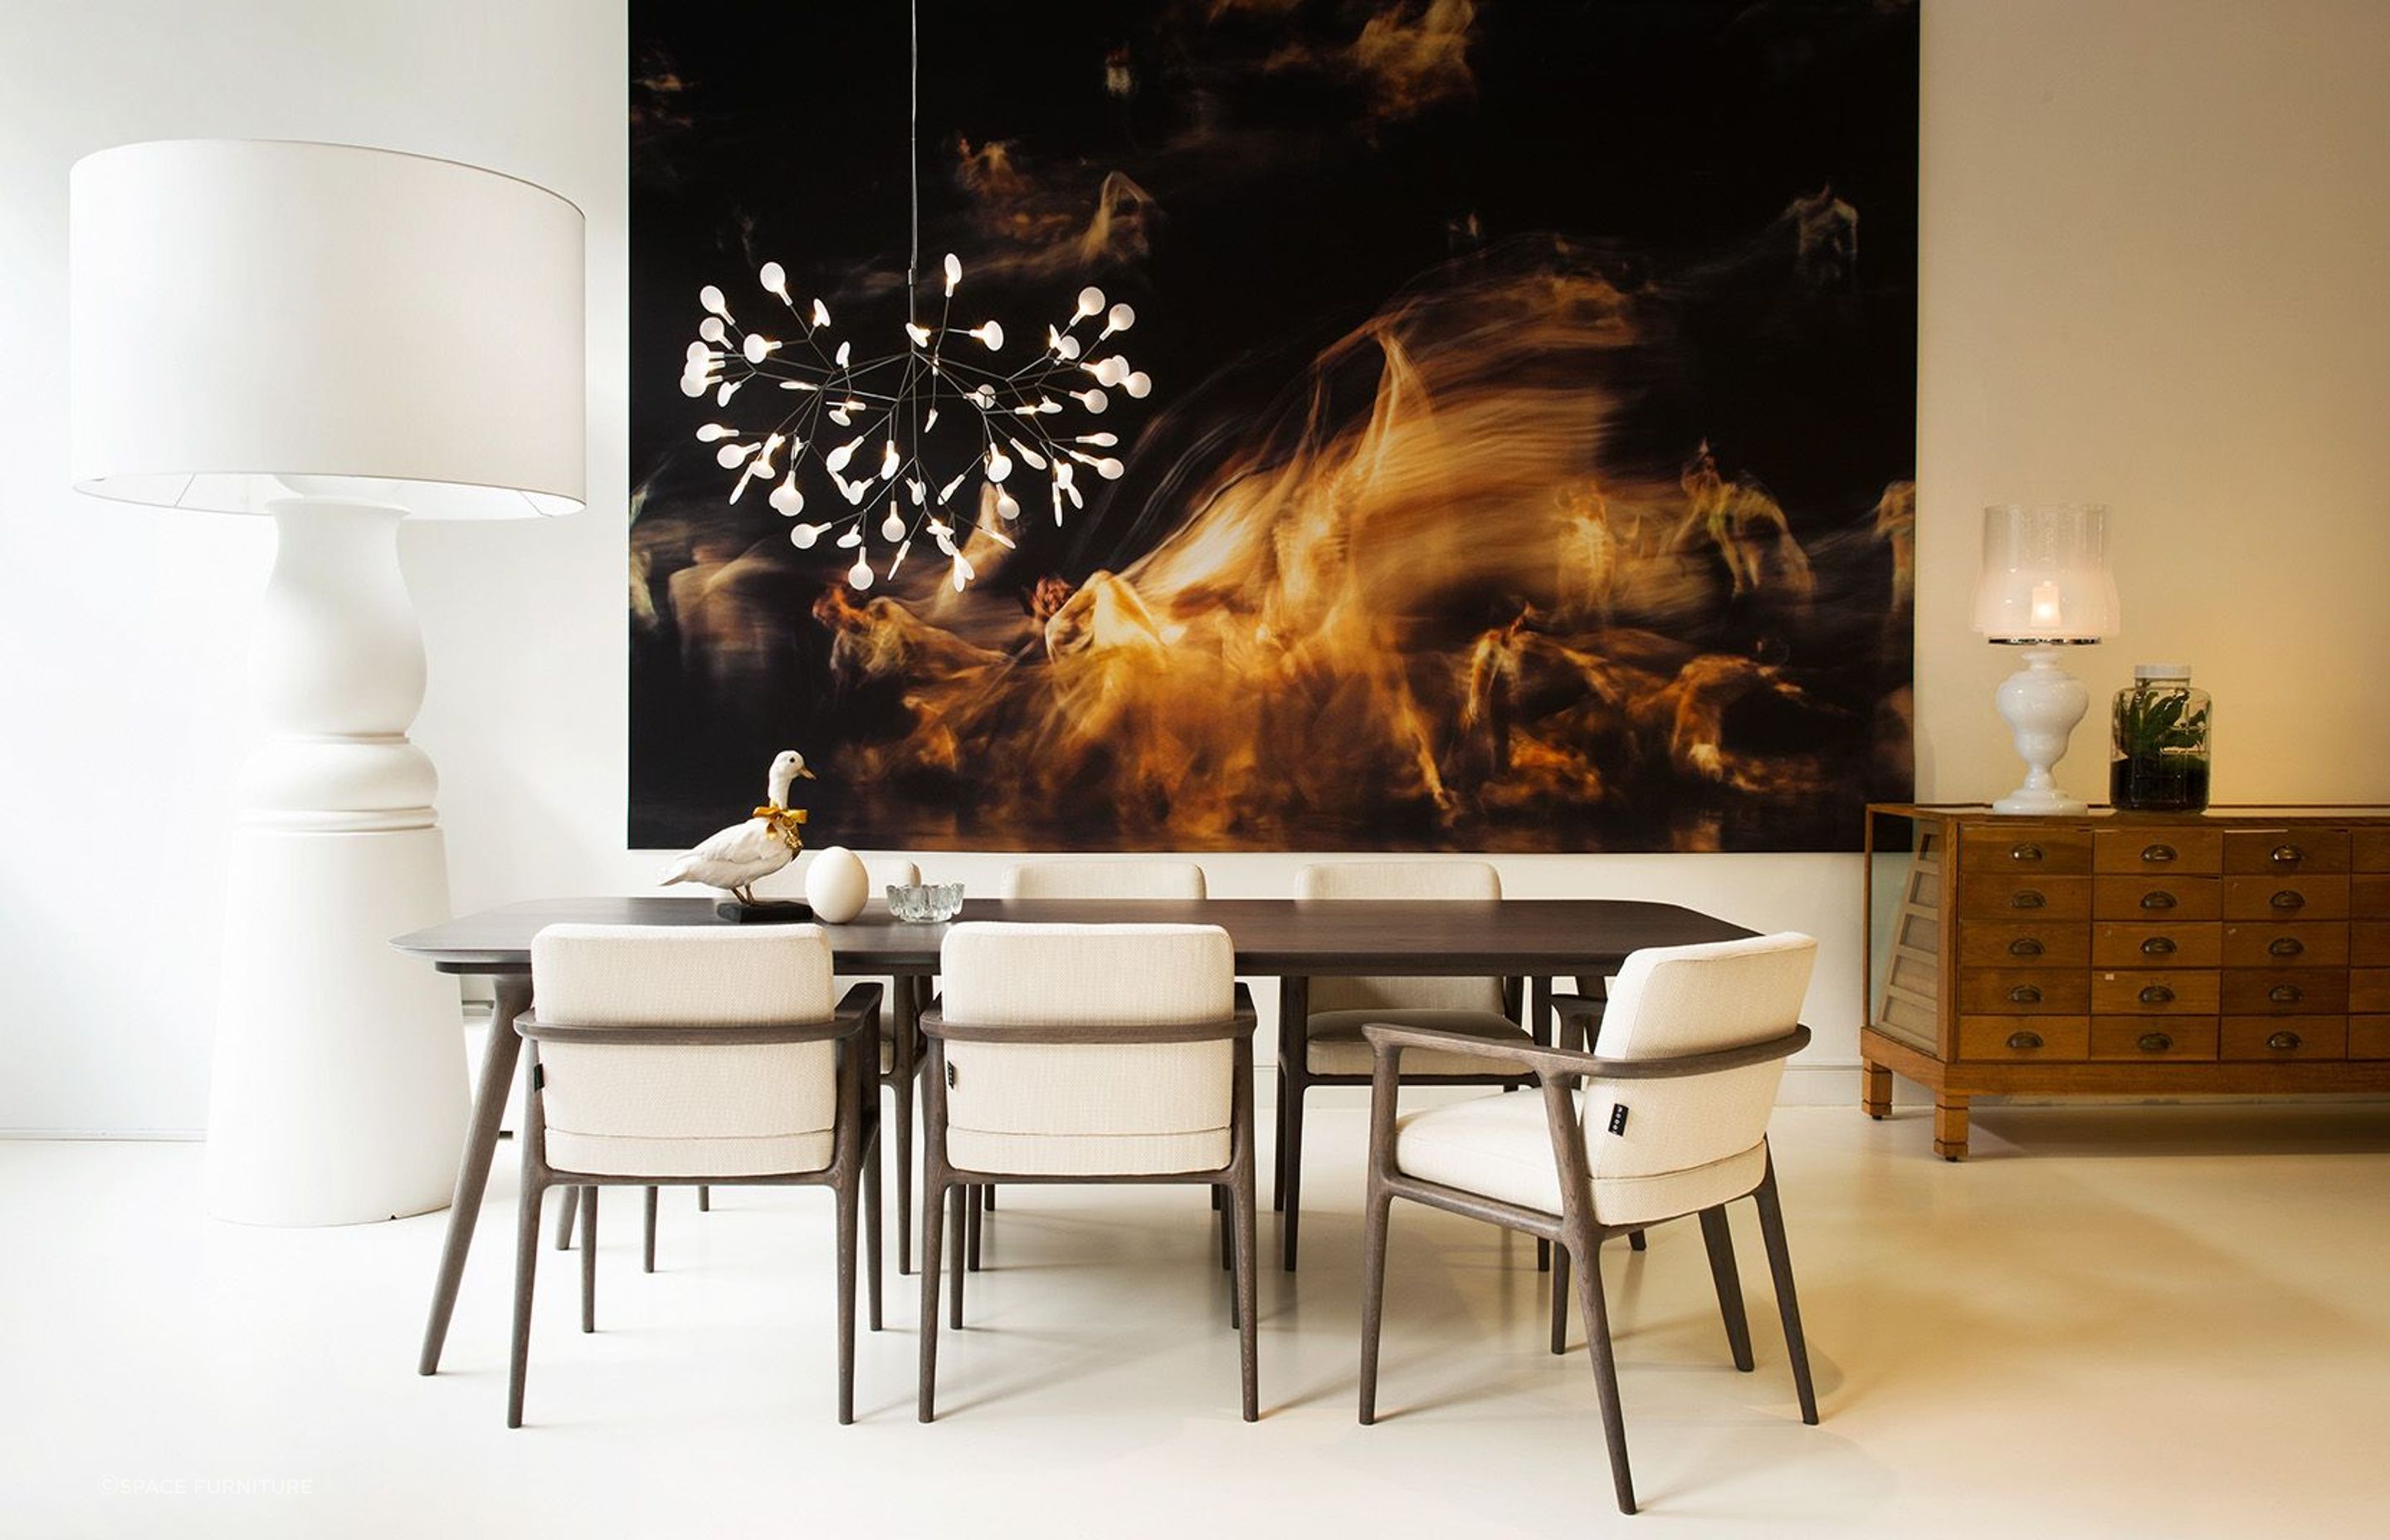 Inspired by the Heracleum plant, the Heracleum II Small Suspension Lamp is a unique addition to any space